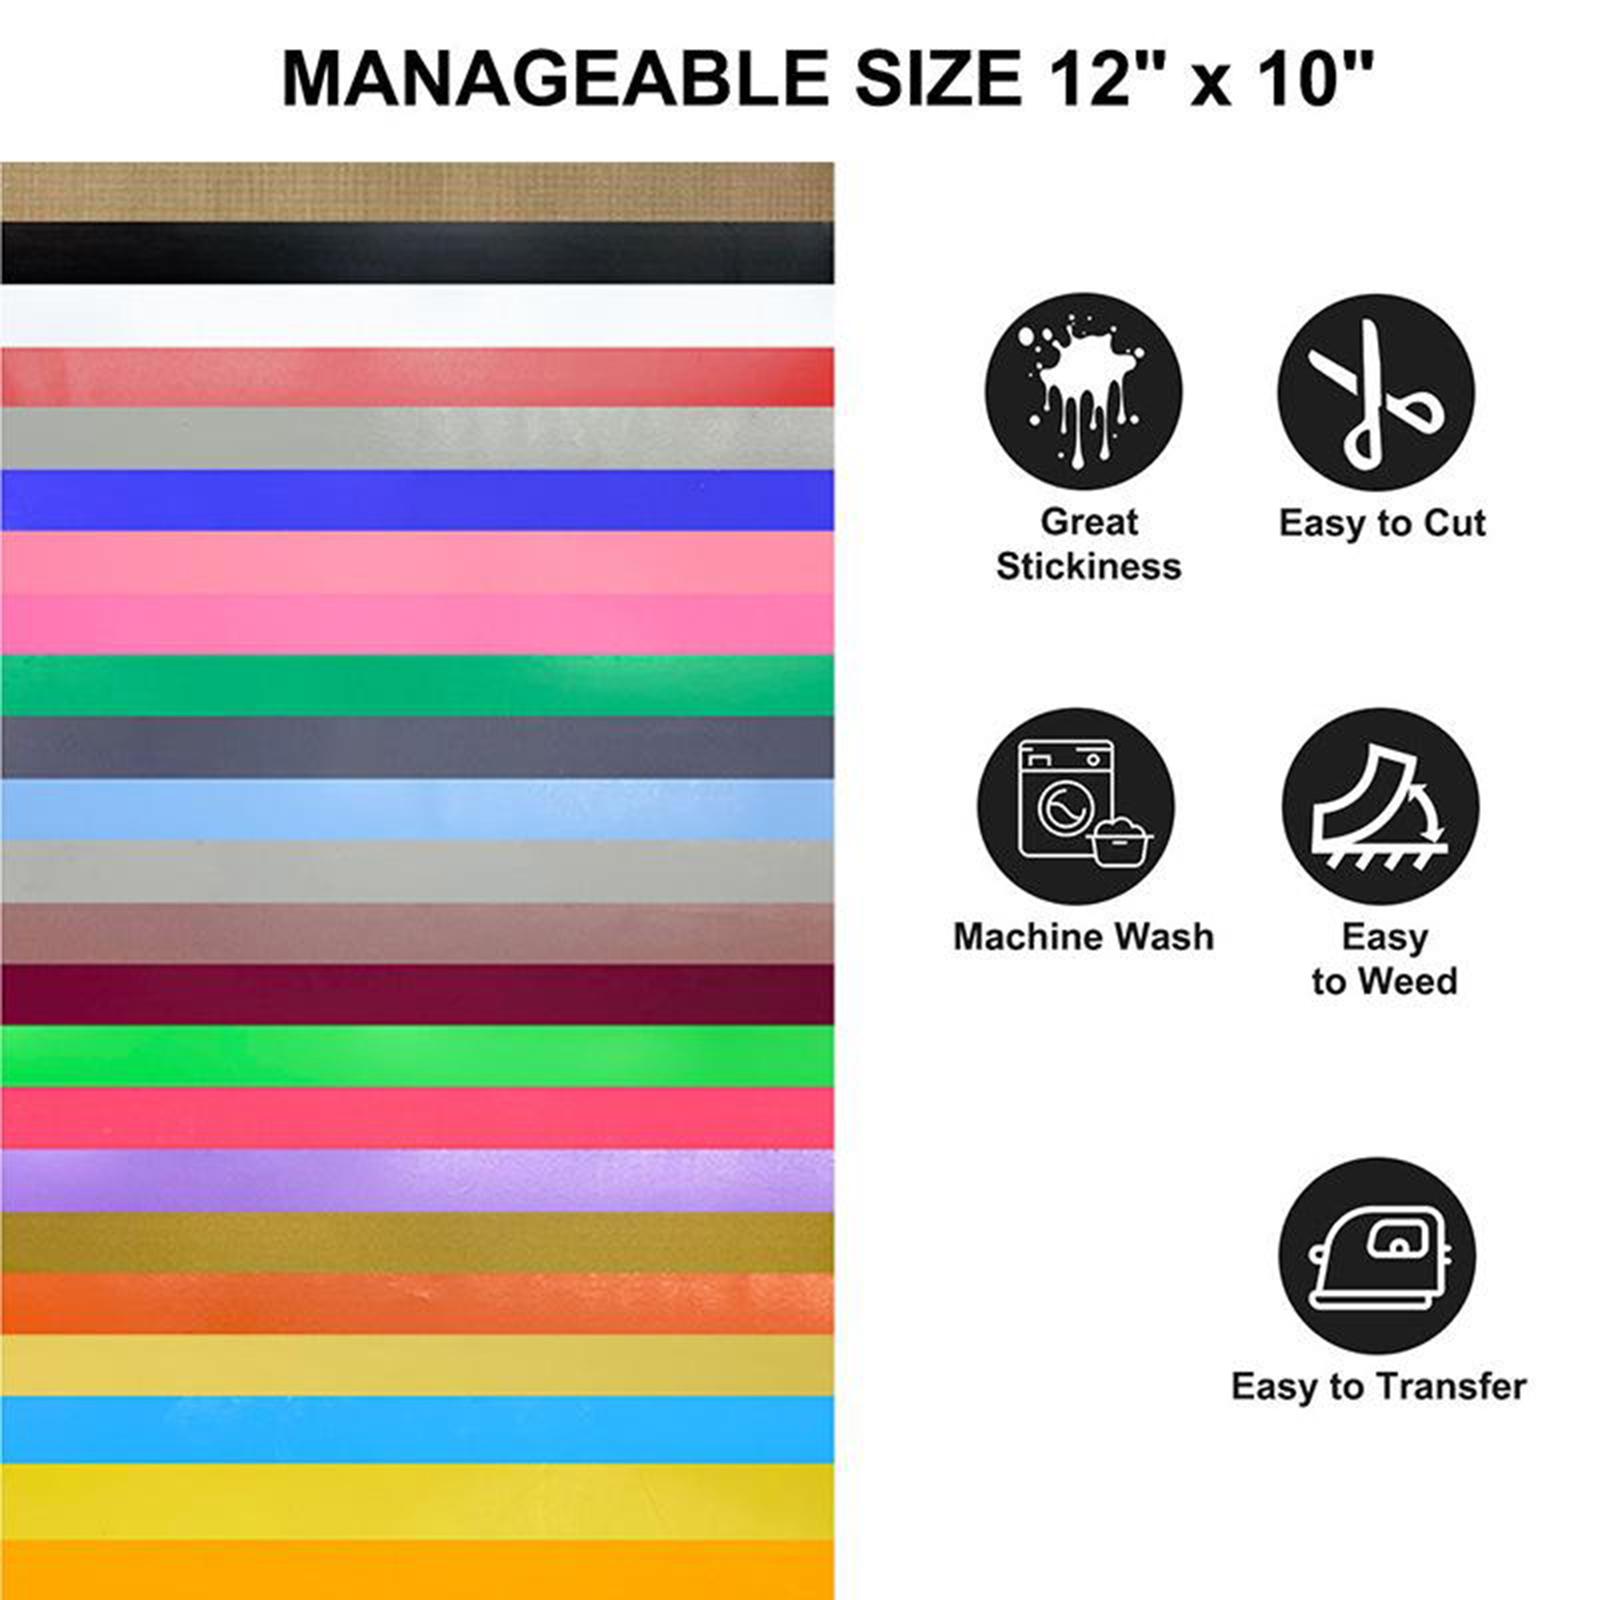 Permanent Adhesive Backed Heat Transfer Vinyl Sheets 12"x10"- Assorted Color Press Vinyl Iron on for Cricut, for Silhouette Cameo, Other Craft Cutters